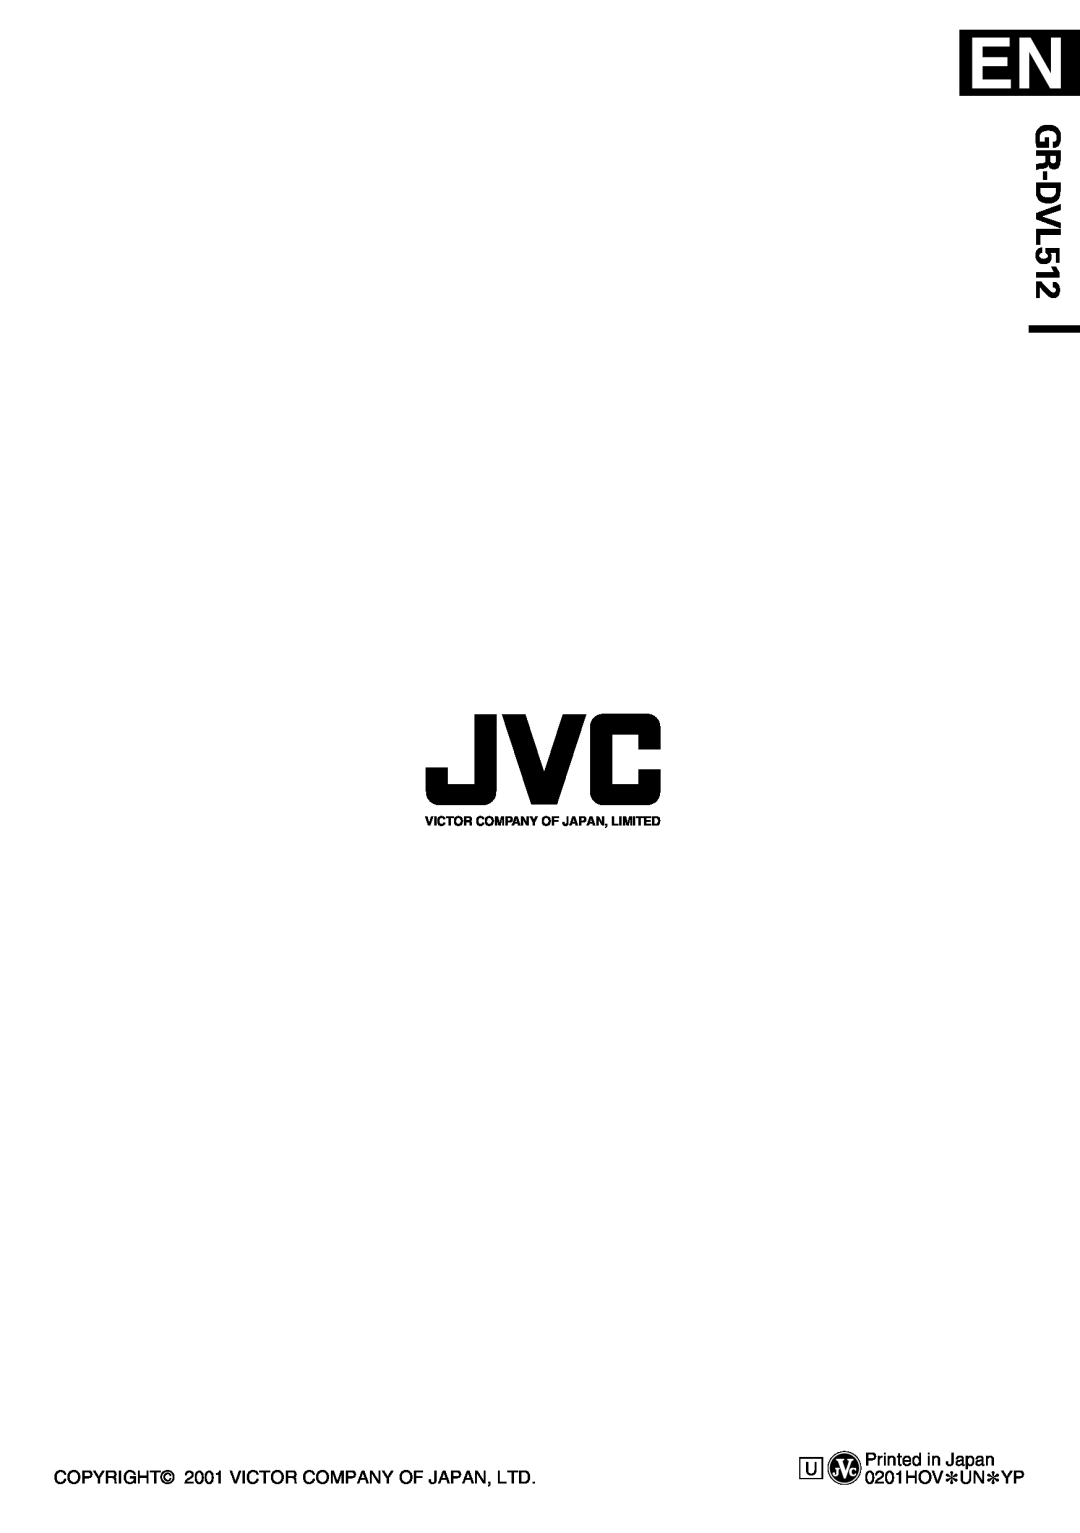 JVC GR-DVL512 specifications Printed in Japan, 0201HOV*UN*YP, Victor Company Of Japan, Limited 